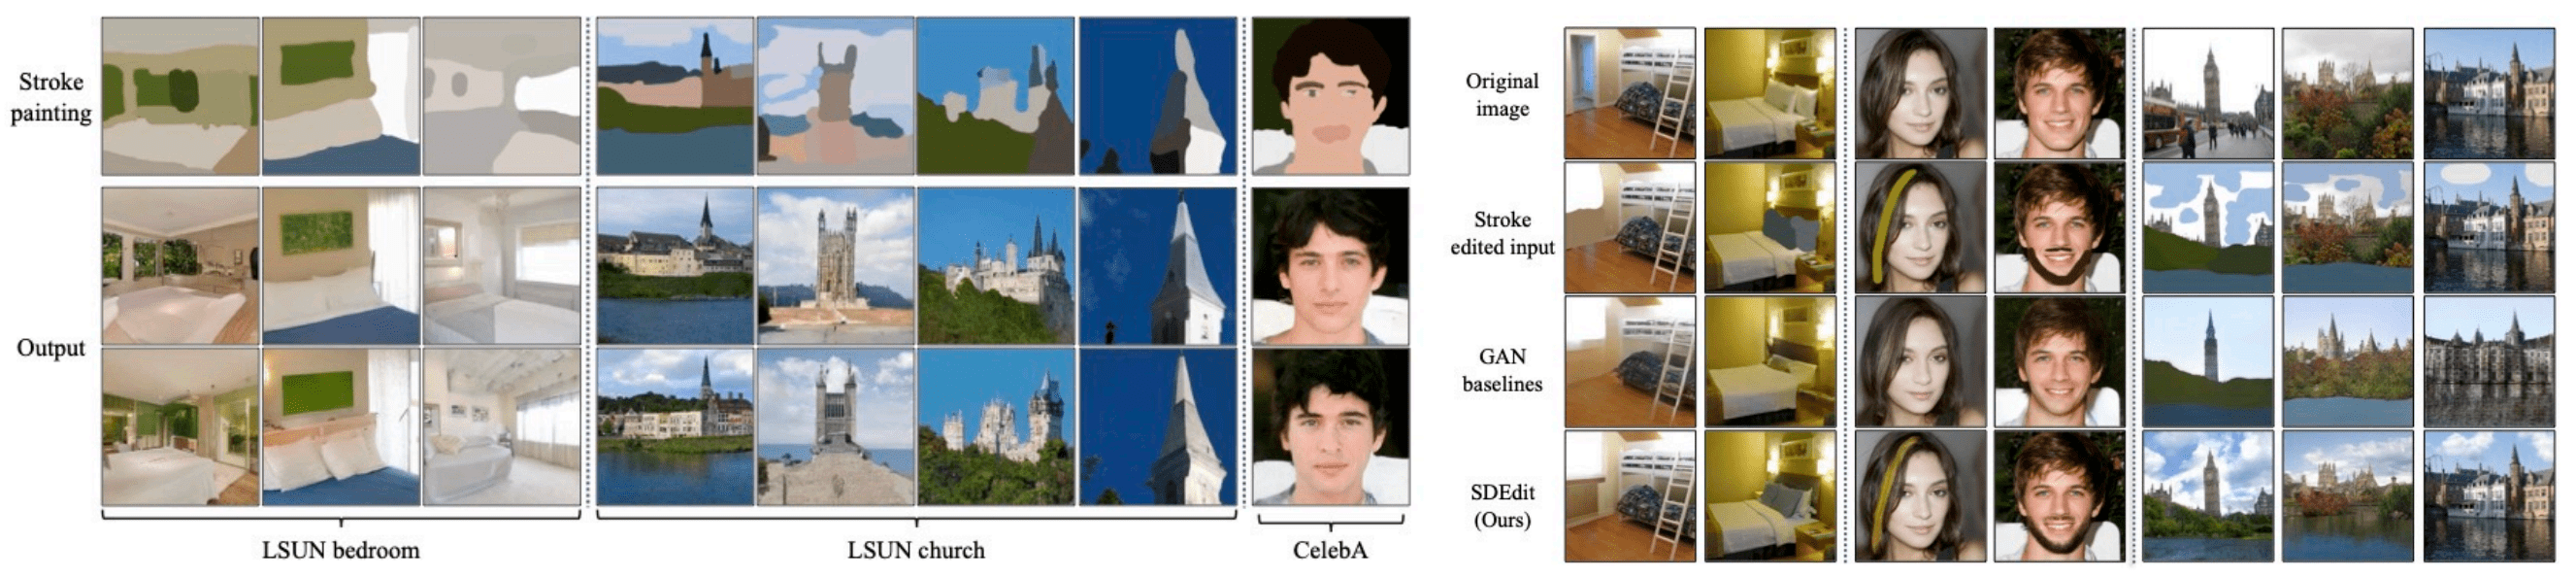 SDEdit can generate realistic, faithful and diverse images for a given stroke input drawn by human